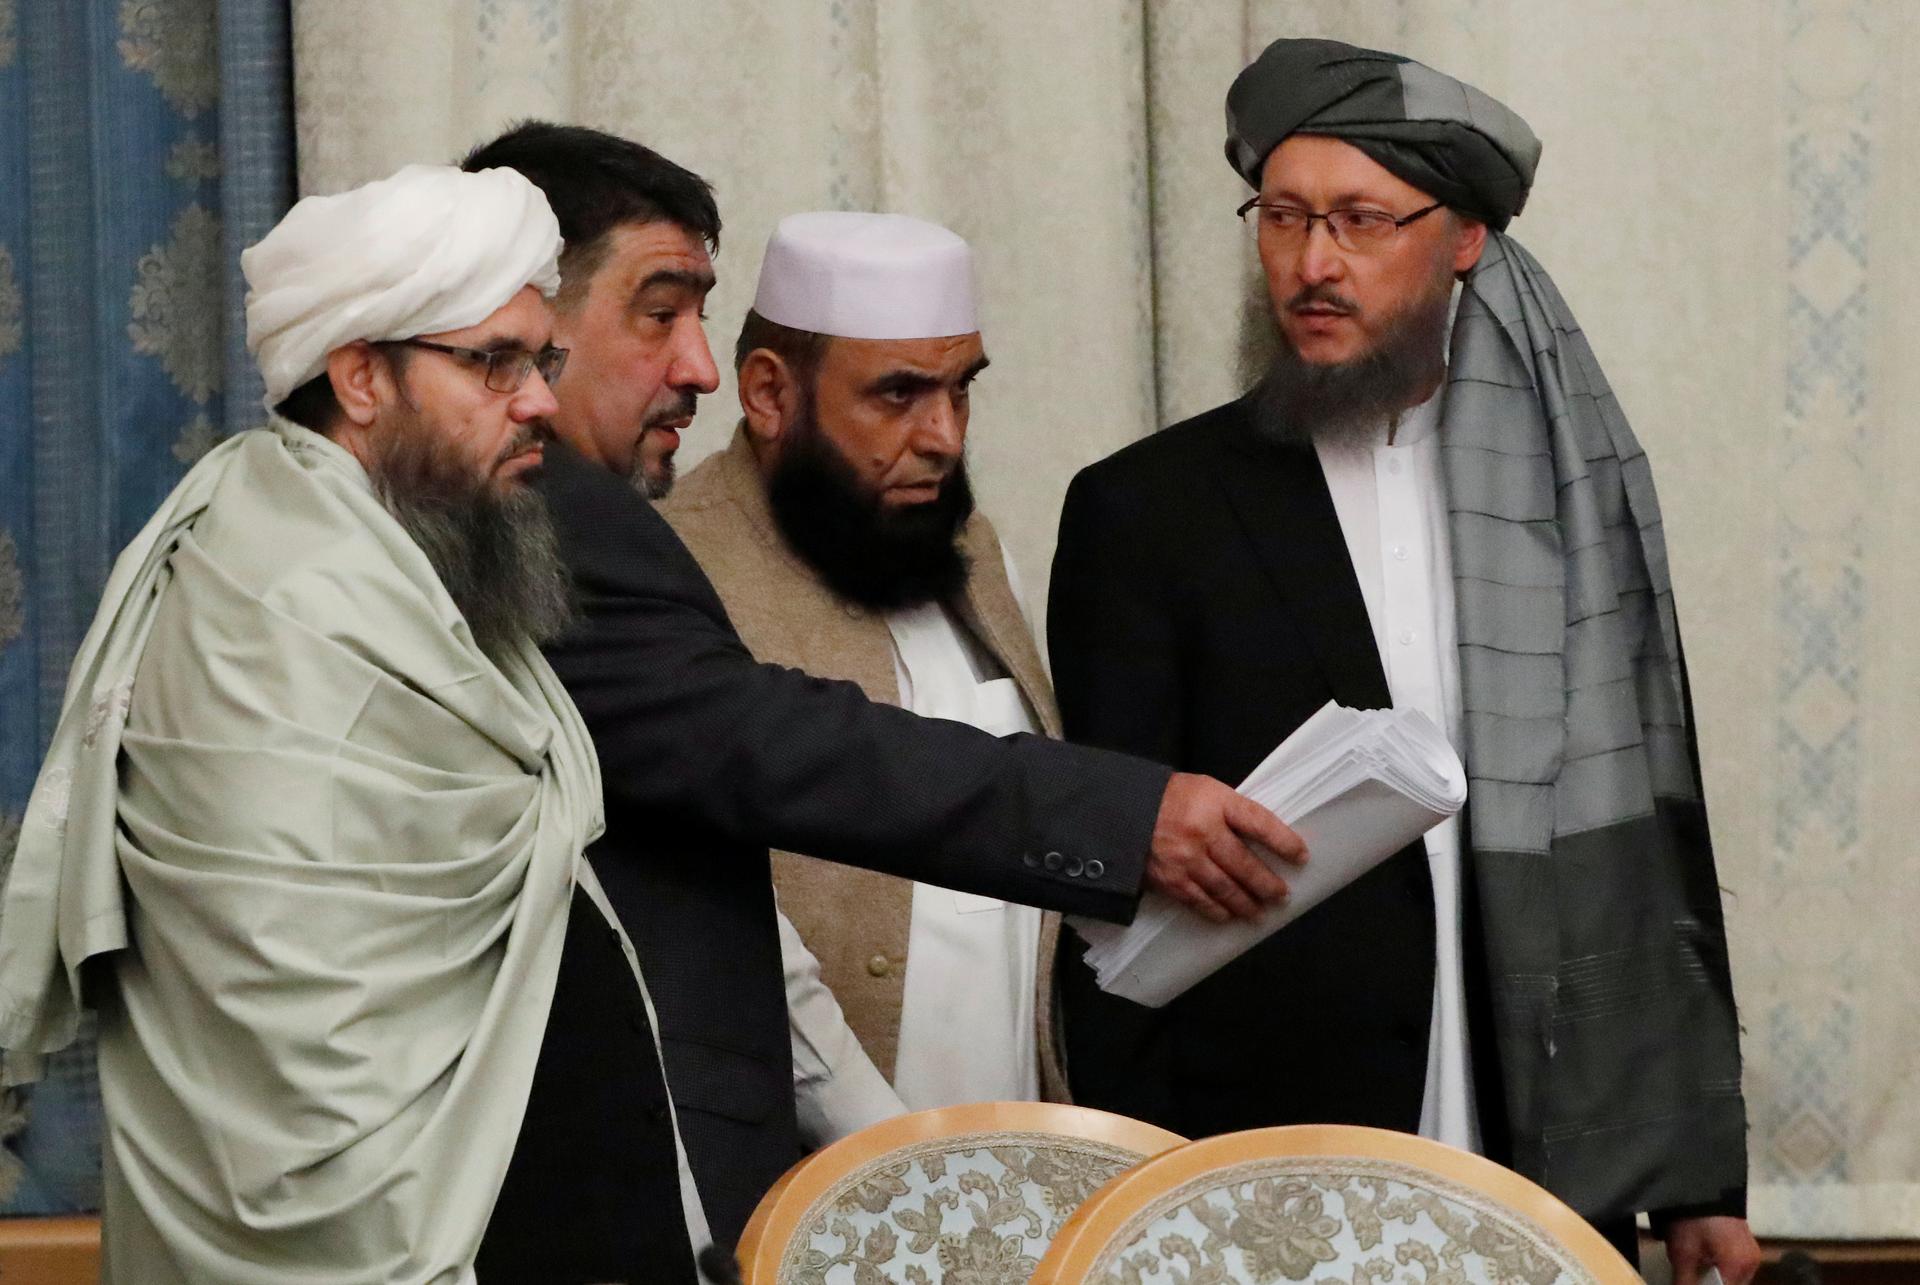 Members of the Taliban delegation take their seats during the multilateral peace talks on Afghanistan in Moscow, Russia November 9, 2018.